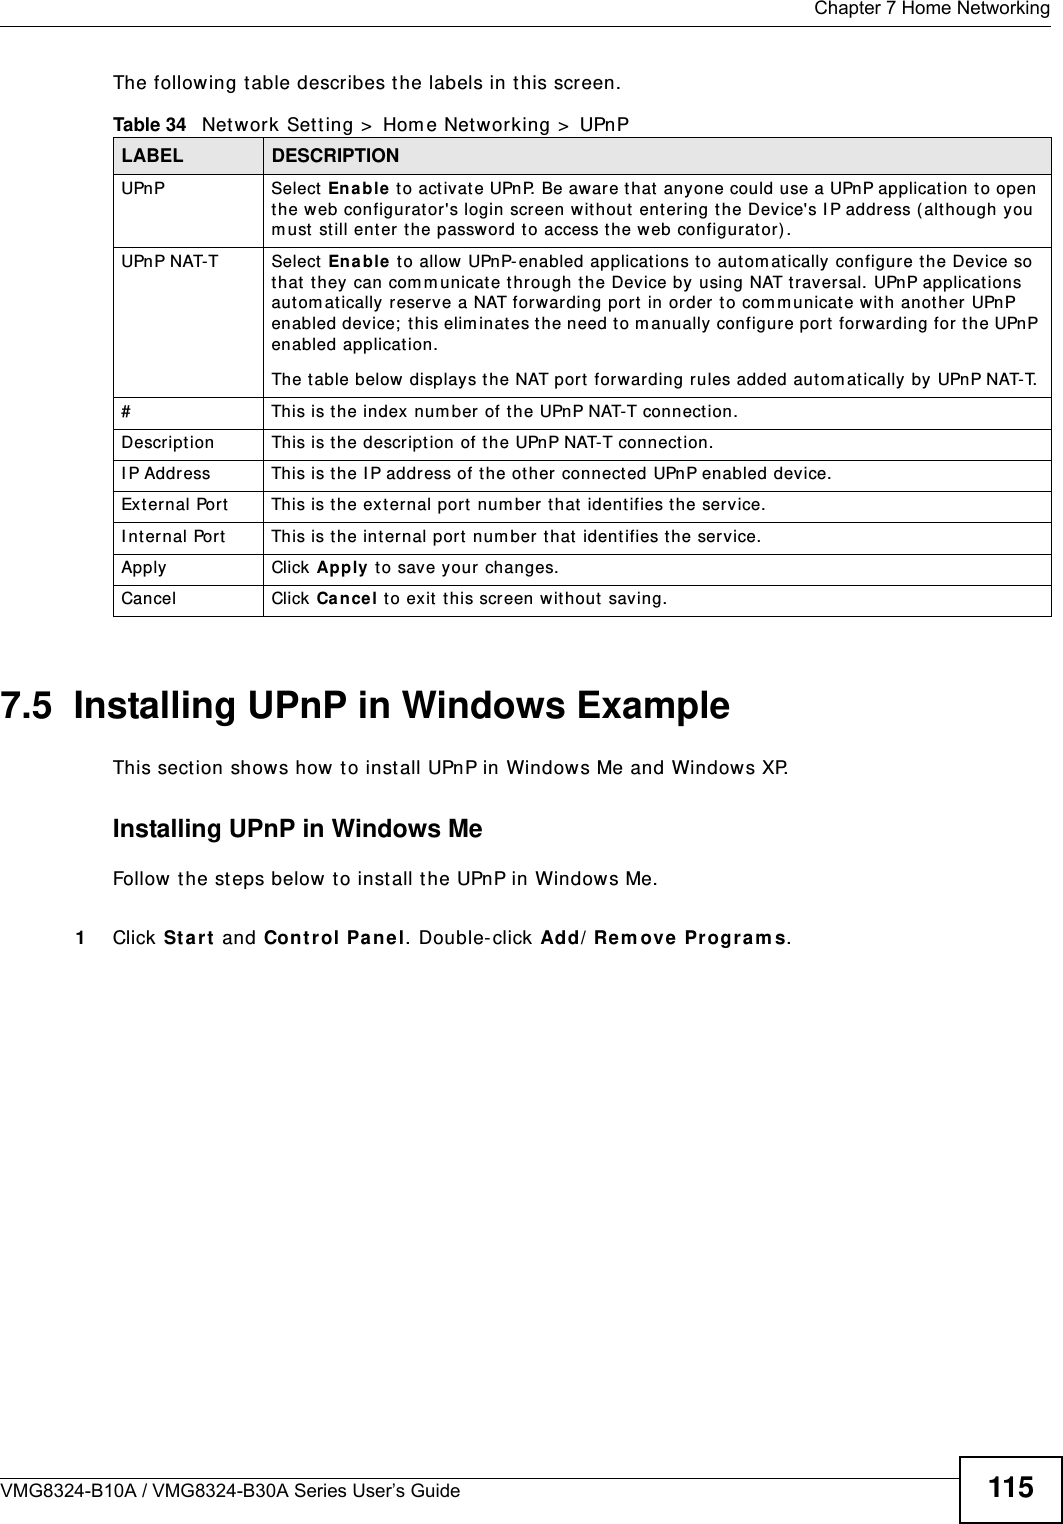  Chapter 7 Home NetworkingVMG8324-B10A / VMG8324-B30A Series User’s Guide 115The following t able describes t he labels in this screen.7.5  Installing UPnP in Windows ExampleThis sect ion shows how t o inst all UPnP in Windows Me and Windows XP. Installing UPnP in Windows MeFollow t he steps below t o install t he UPnP in Windows Me. 1Click St a rt  and Cont rol Pa n e l. Double- click Add/ Re m ove Progra m s.Table 34   Net work Sett ing &gt;  Hom e Net working &gt;  UPnPLABEL DESCRIPTIONUPnP Select  Ena ble  t o act ivate UPnP. Be aware t hat  anyone could use a UPnP applicat ion to open the web configurator&apos;s login screen w it hout  ent ering t he Device&apos;s I P address (alt hough you m ust  st ill ent er  the password t o access t he web configurator) .UPnP NAT-T Select  En a ble t o allow UPnP- enabled applicat ions to aut om at ically configure t he Device so that  t hey can com m unicat e t hrough t he Device by using NAT t raversal. UPnP applicat ions aut om at ically reser ve a NAT forwarding port  in order t o com m unicate wit h another UPnP enabled device;  t his elim inat es t he need t o m anually configure port  forwarding for t he UPnP enabled applicat ion. The table below displays the NAT port forwarding rules added autom at ically by  UPnP NAT-T.# This is t he index num ber of the UPnP NAT-T connect ion.Descript ion This is t he description of t he UPnP NAT-T connect ion.I P Address This is the I P addr ess of t he ot her connect ed UPnP enabled device.Ext ernal Port This is t he ext ernal port num ber t hat ident ifies t he service.I nternal Port This is t he int ernal port num ber t hat  ident ifies t he service.Apply Click Apply to save your changes.Cancel Click Ca nce l to exit t his screen without  saving.